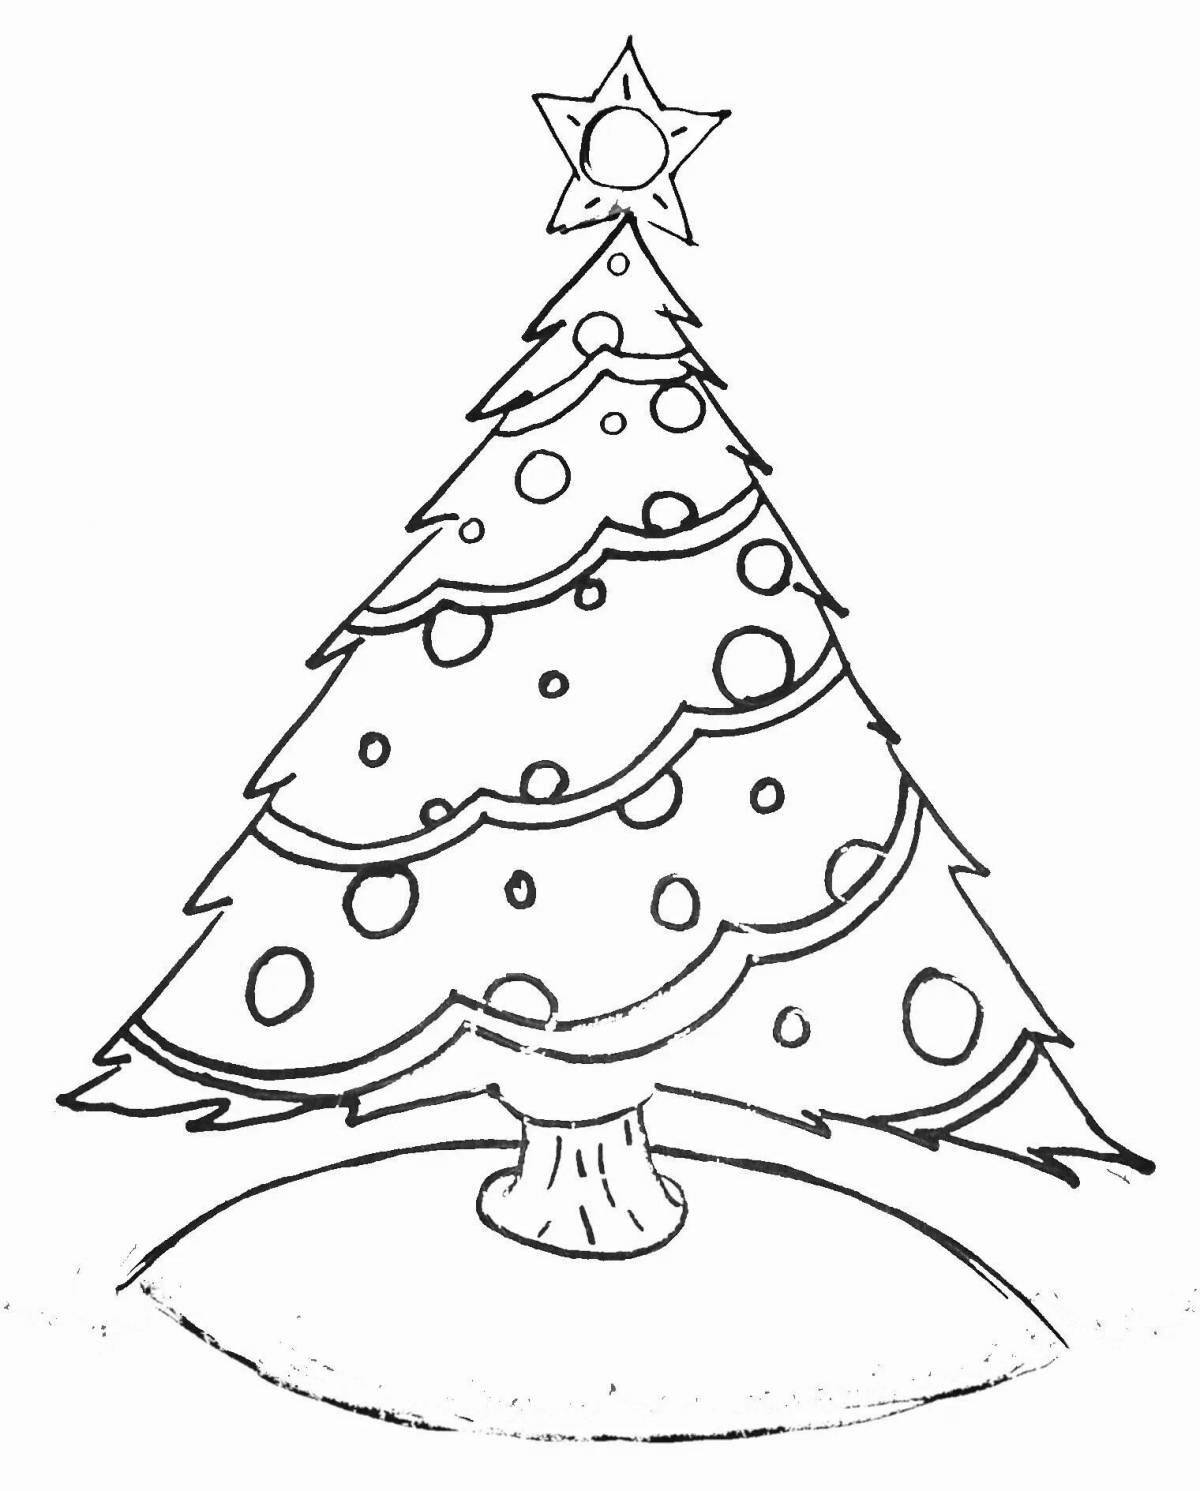 Adorable Christmas tree coloring book for girls